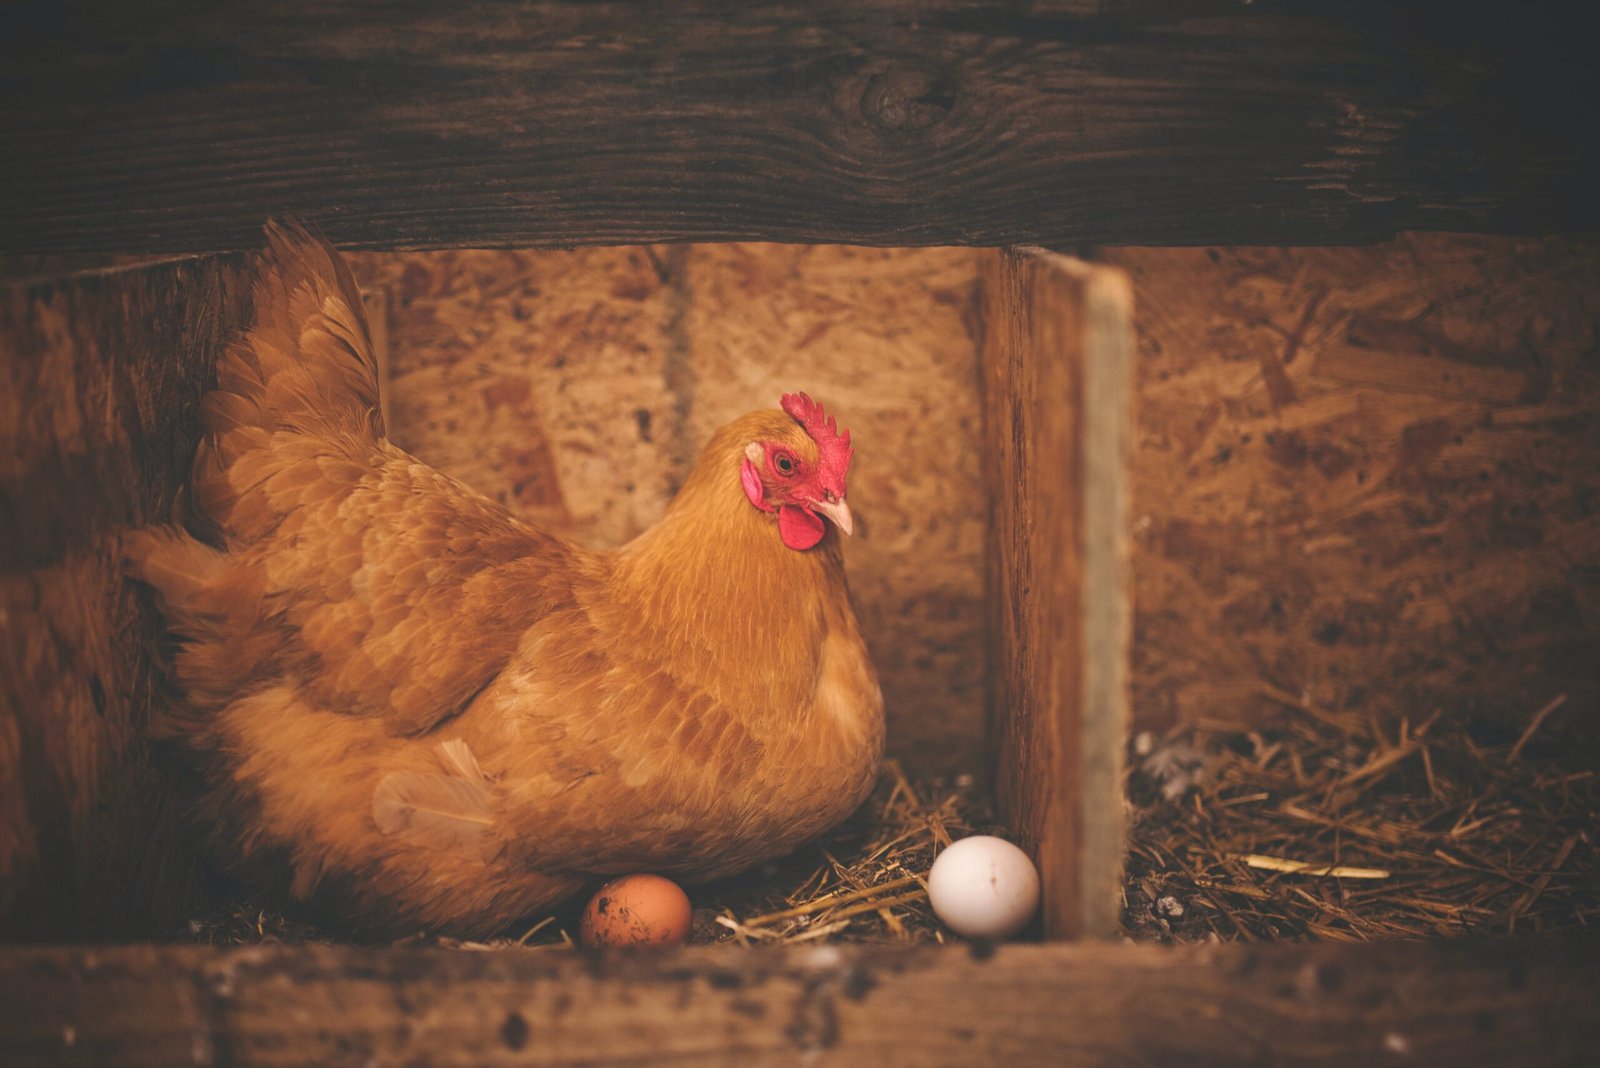 Whats The Difference Between Bantam And Standard-sized Chickens?